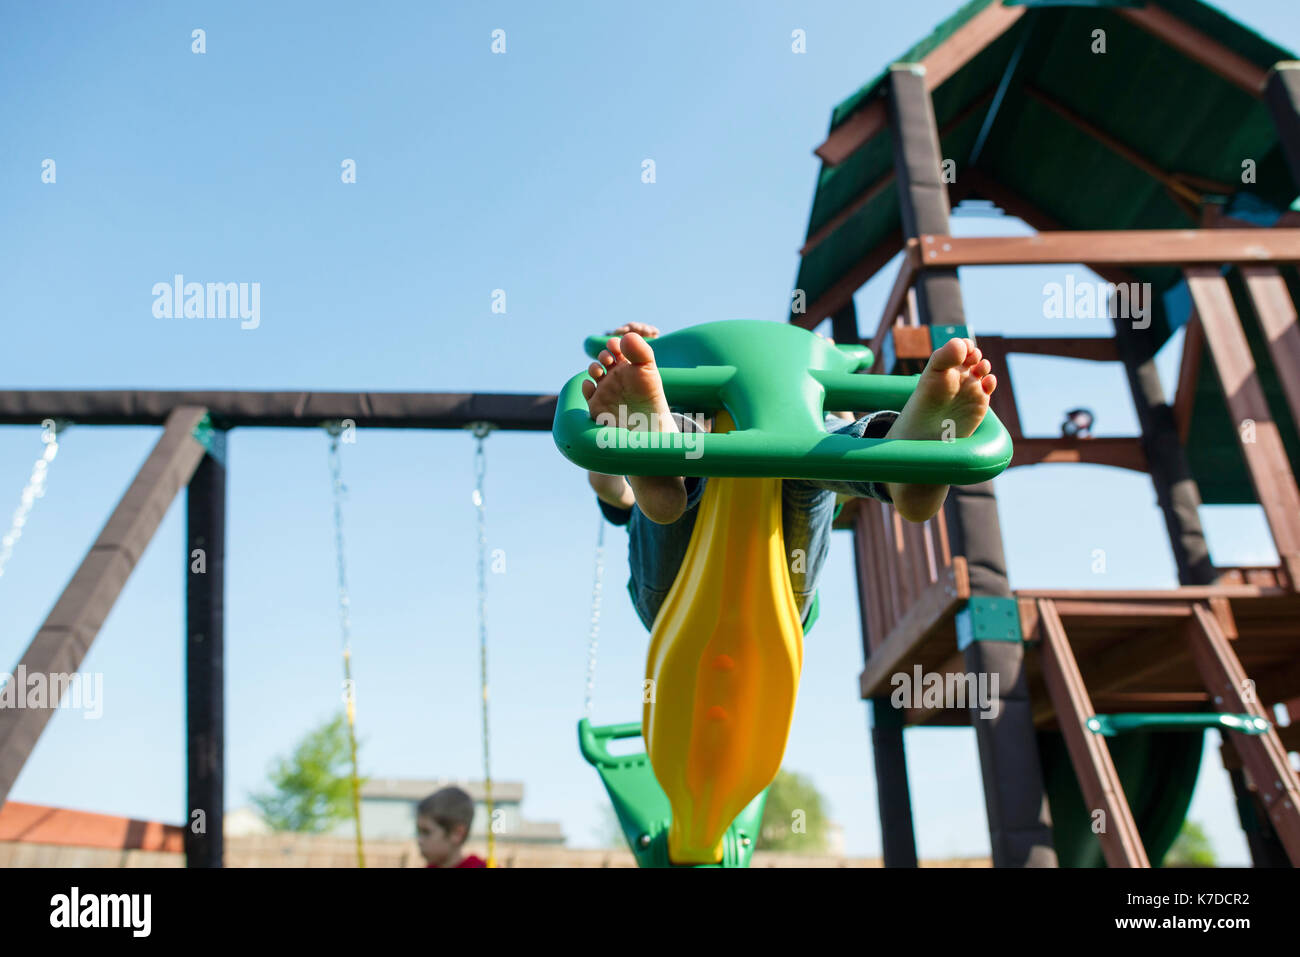 Low angle view of girl playing on outdoor play equipment against clear sky Stock Photo